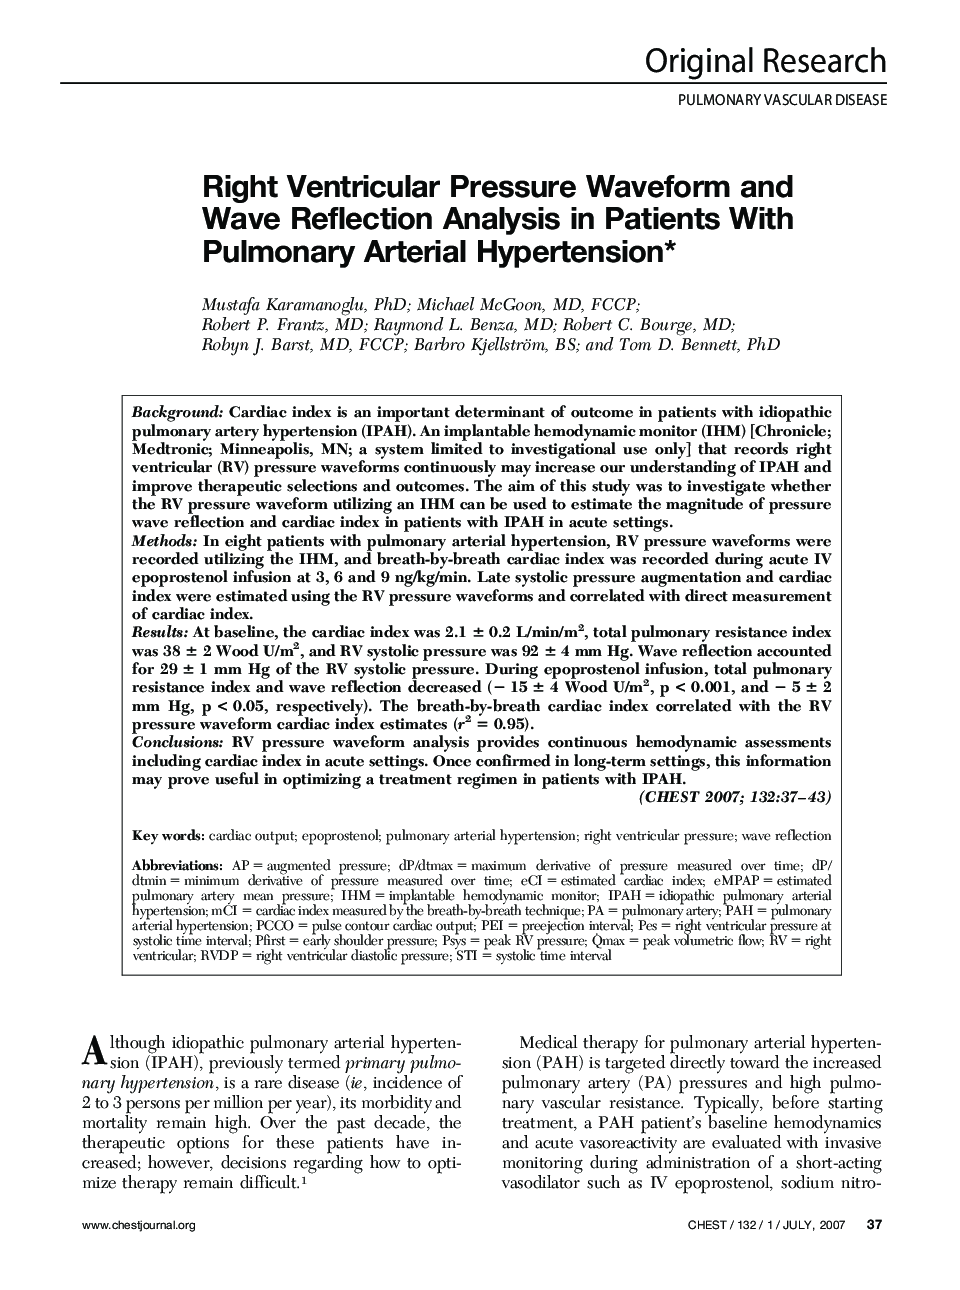 Right Ventricular Pressure Waveform and Wave Reflection Analysis in Patients With Pulmonary Arterial Hypertension 